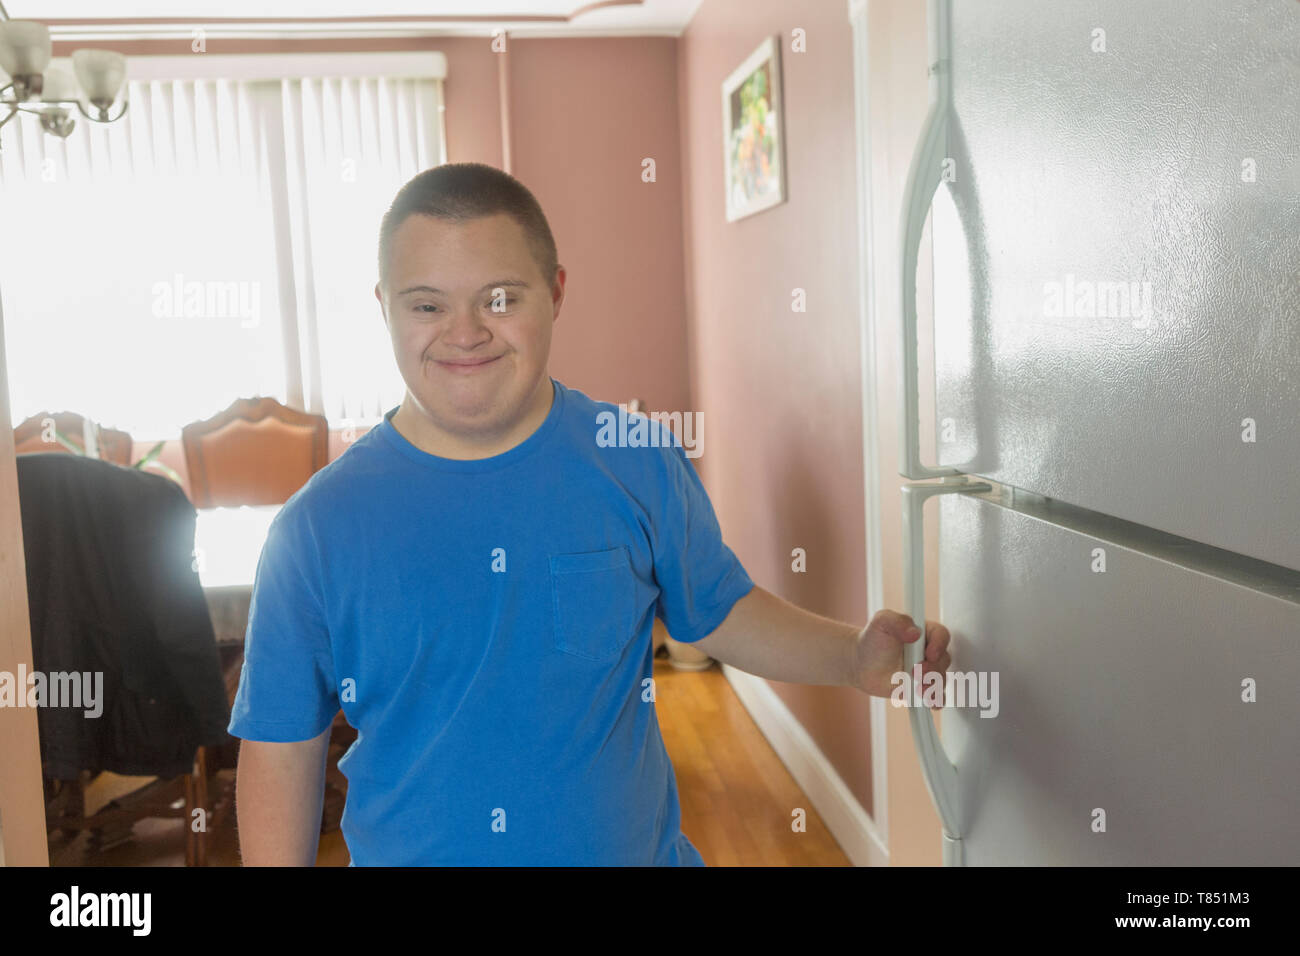 Teen boy with Down Syndrome opening refrigerator Stock Photo